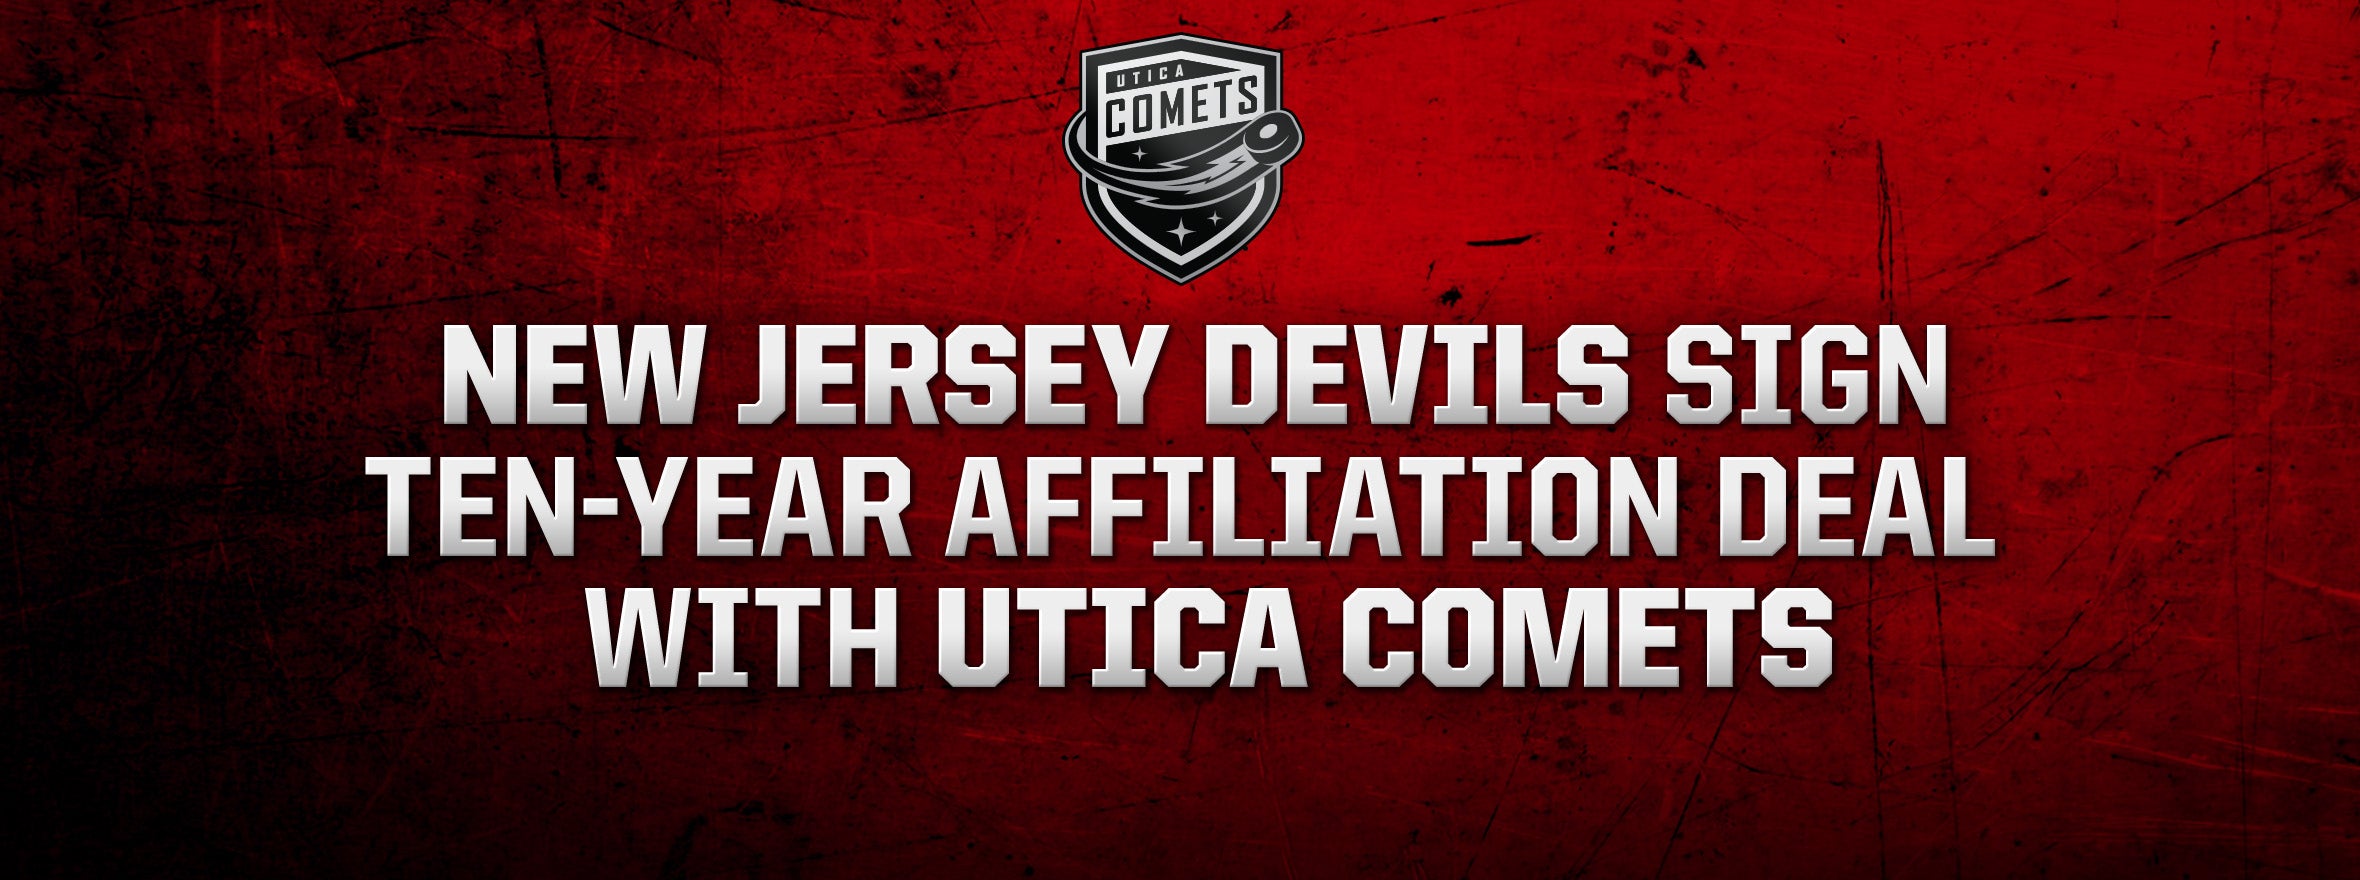 Binghamton Devils officially annouce relocation of AHL affiliate to Utica -  Pipe Dream